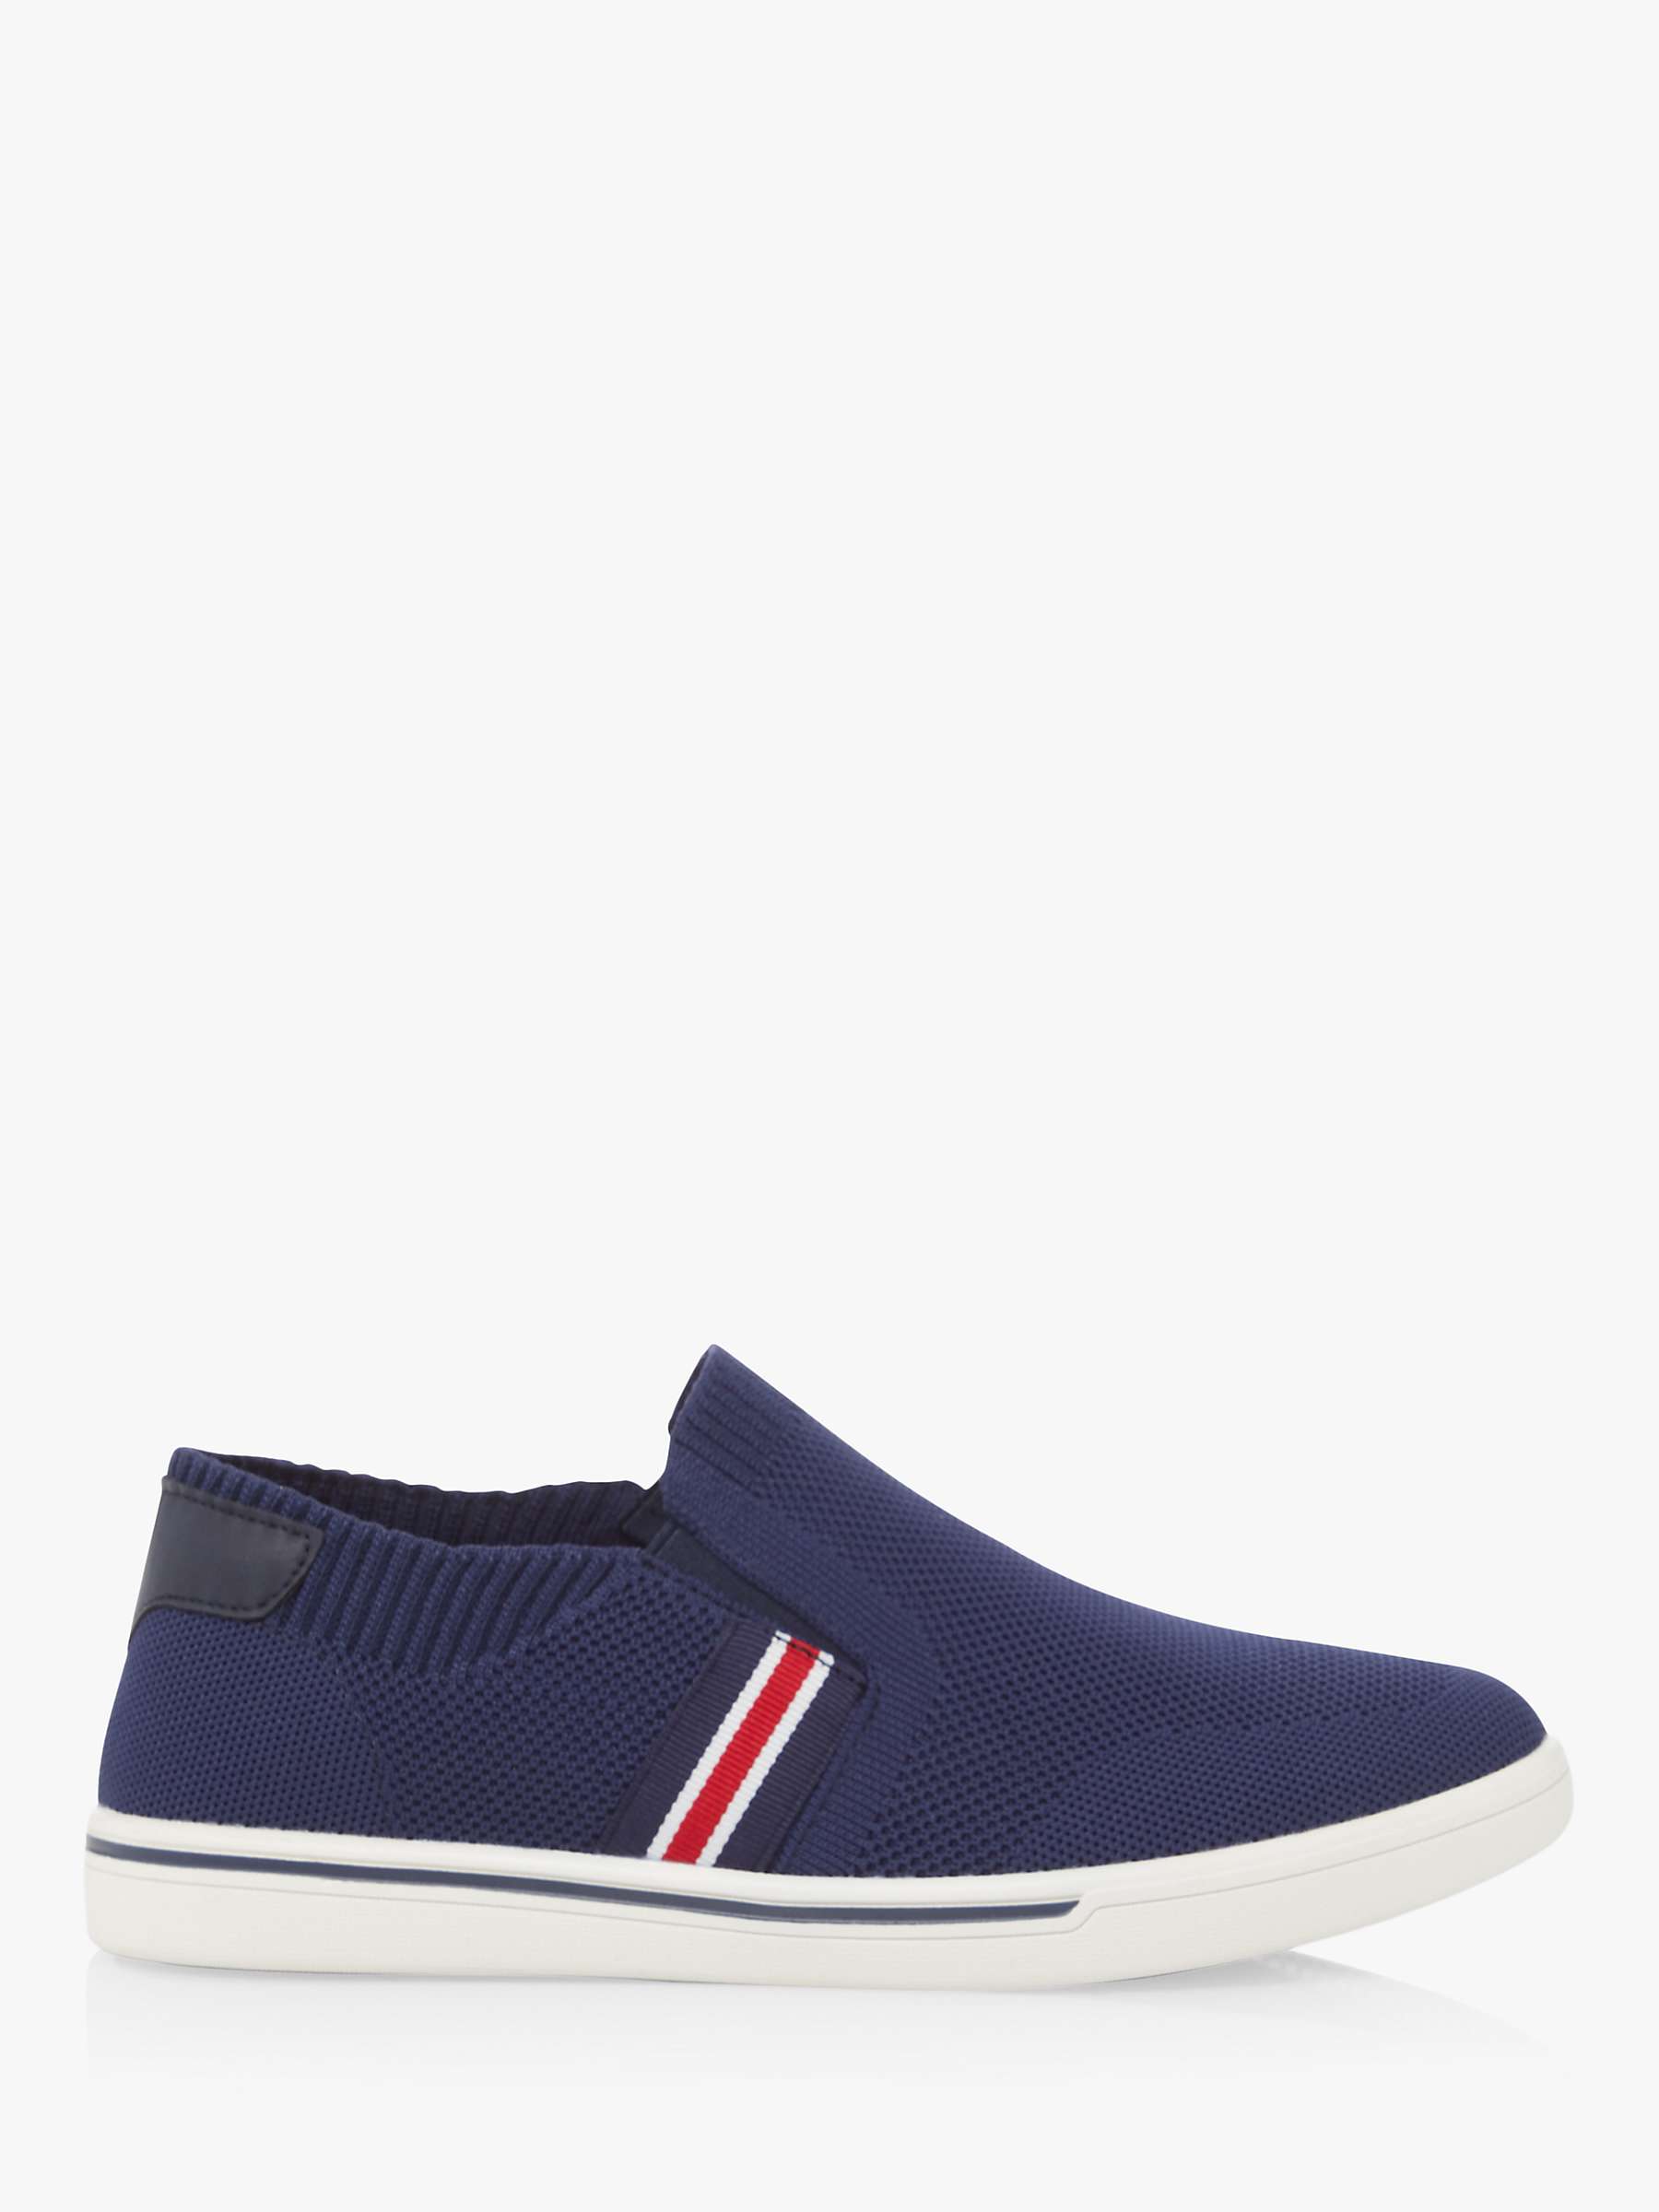 Buy Dune Tycoon Slip On Trainers Online at johnlewis.com